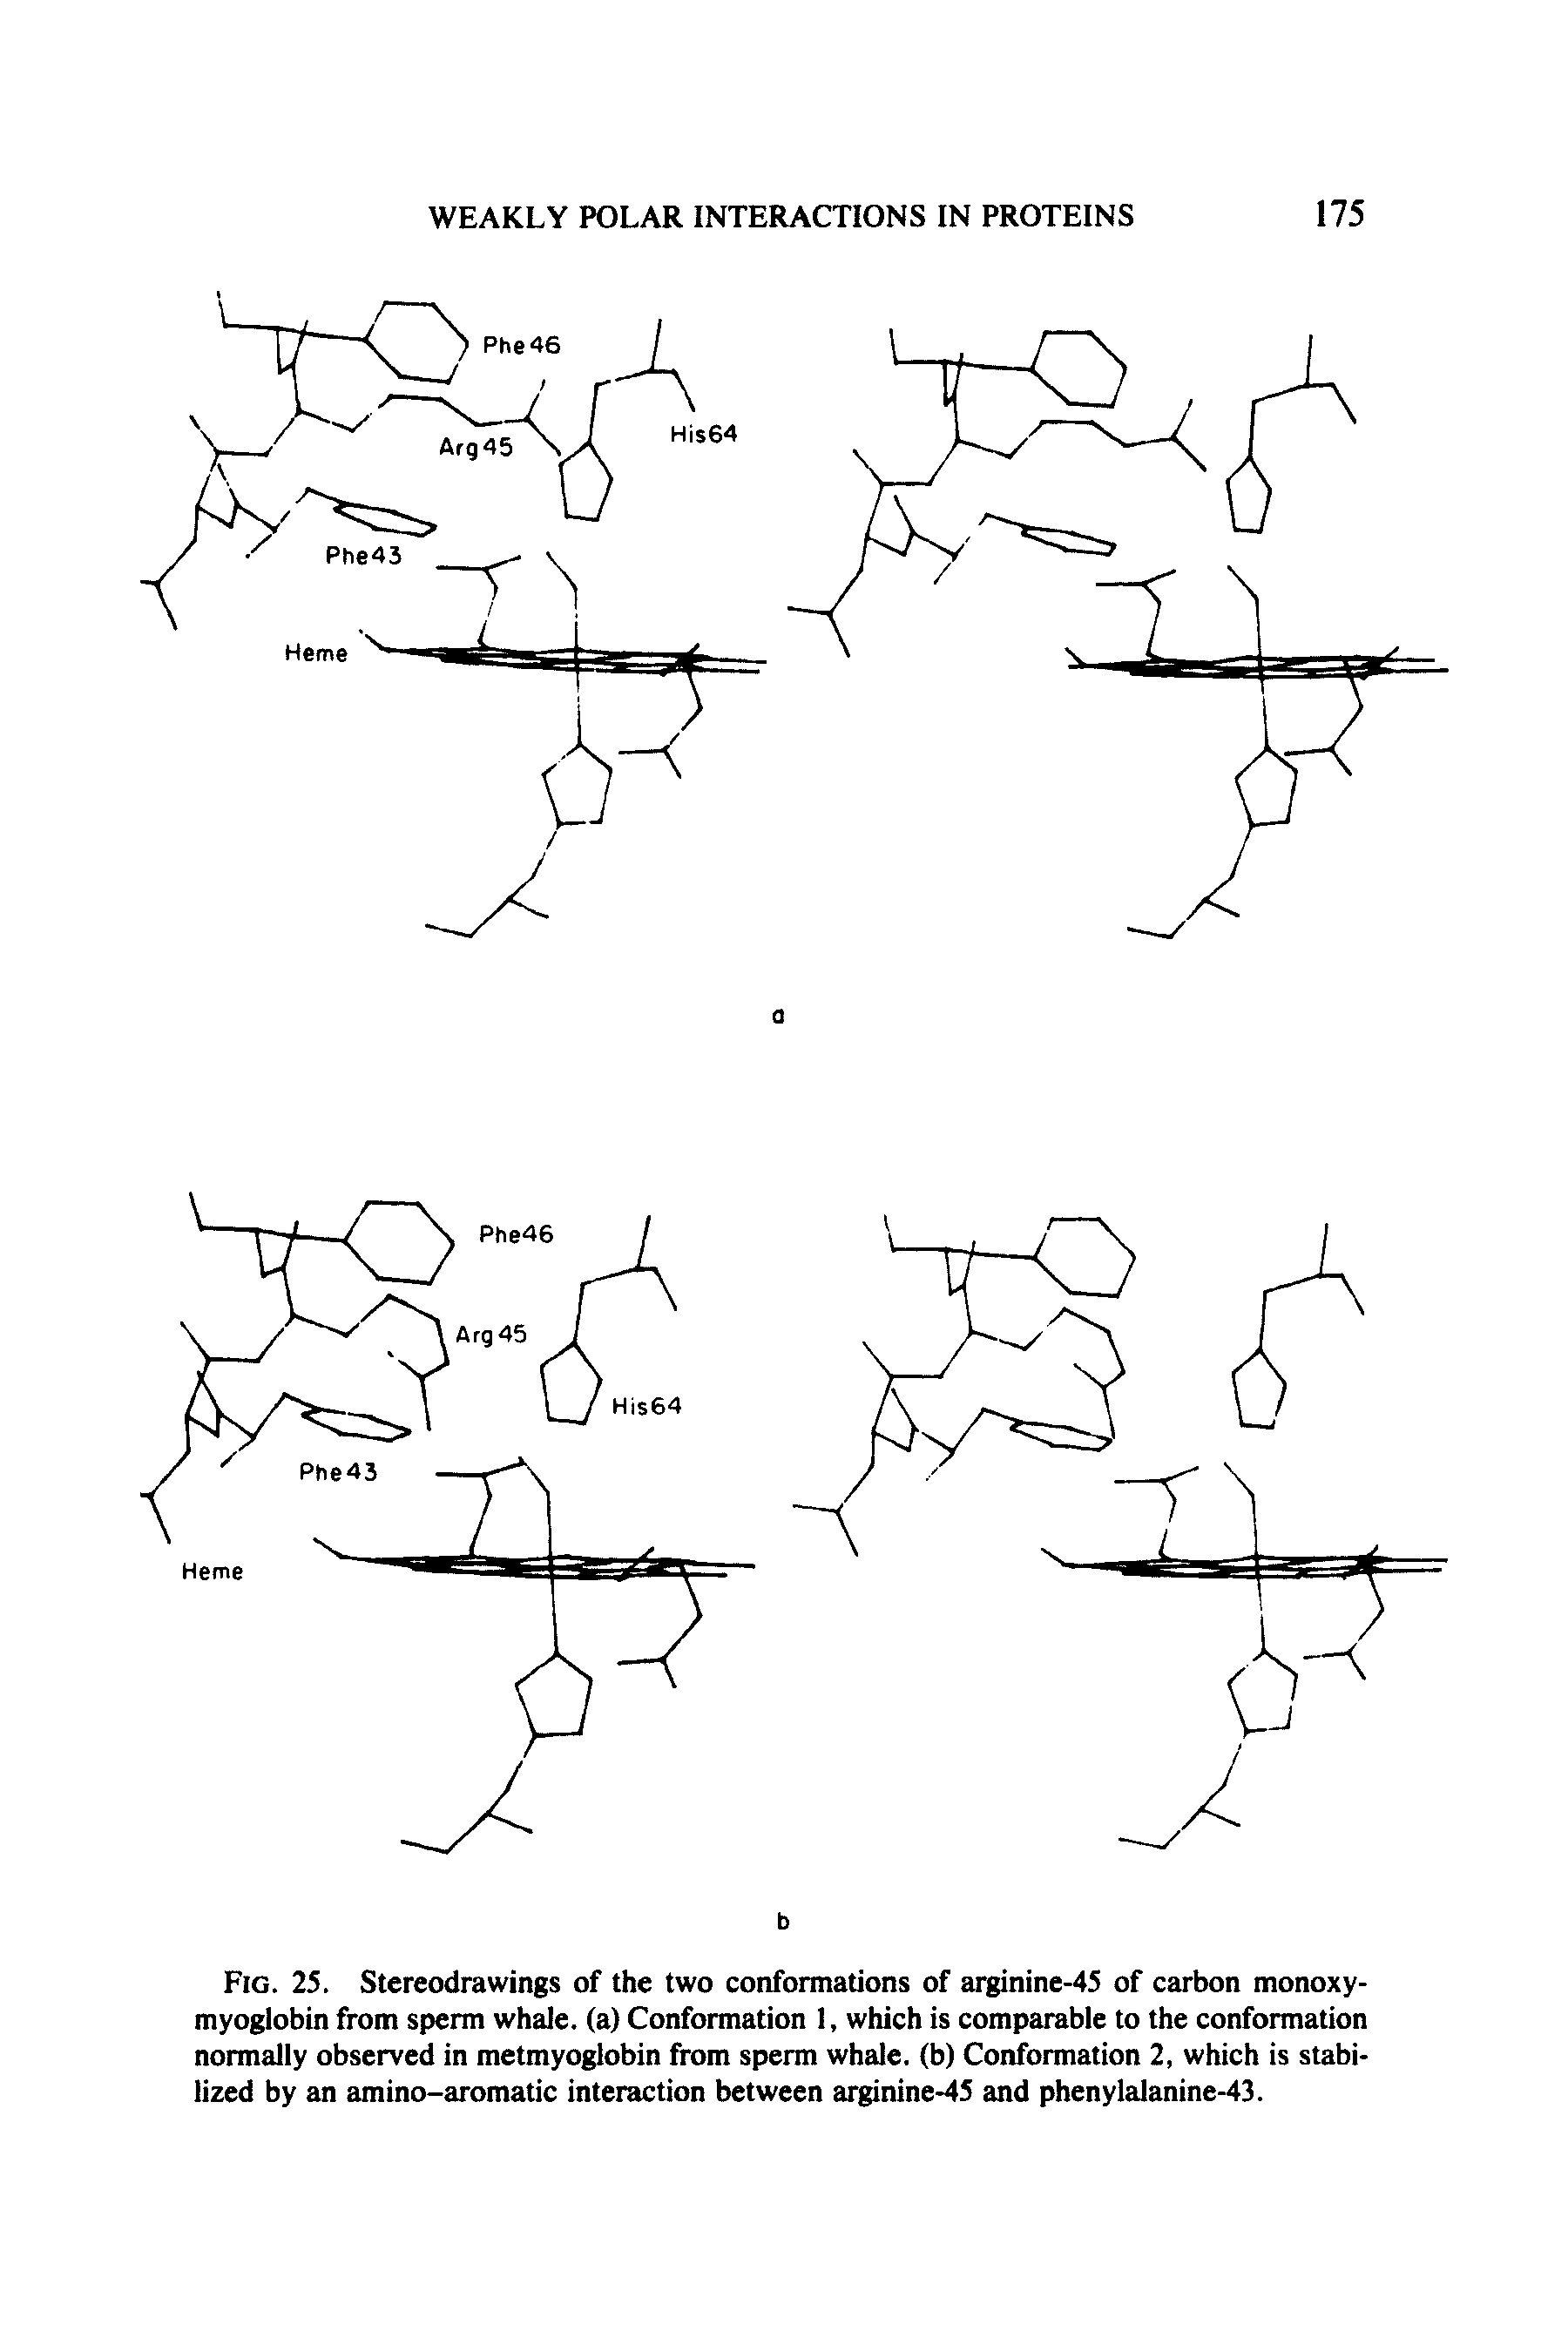 Fig. 25. Stereodrawings of the two conformations of arginine-45 of carbon monoxy-myoglobin from sperm whale, (a) Conformation I, which is comparable to the conformation normally observed in metmyoglobin from sperm whale, (b) Conformation 2, which is stabilized by an amino-aromatic interaction between arginine-45 and phenylalanine-43.